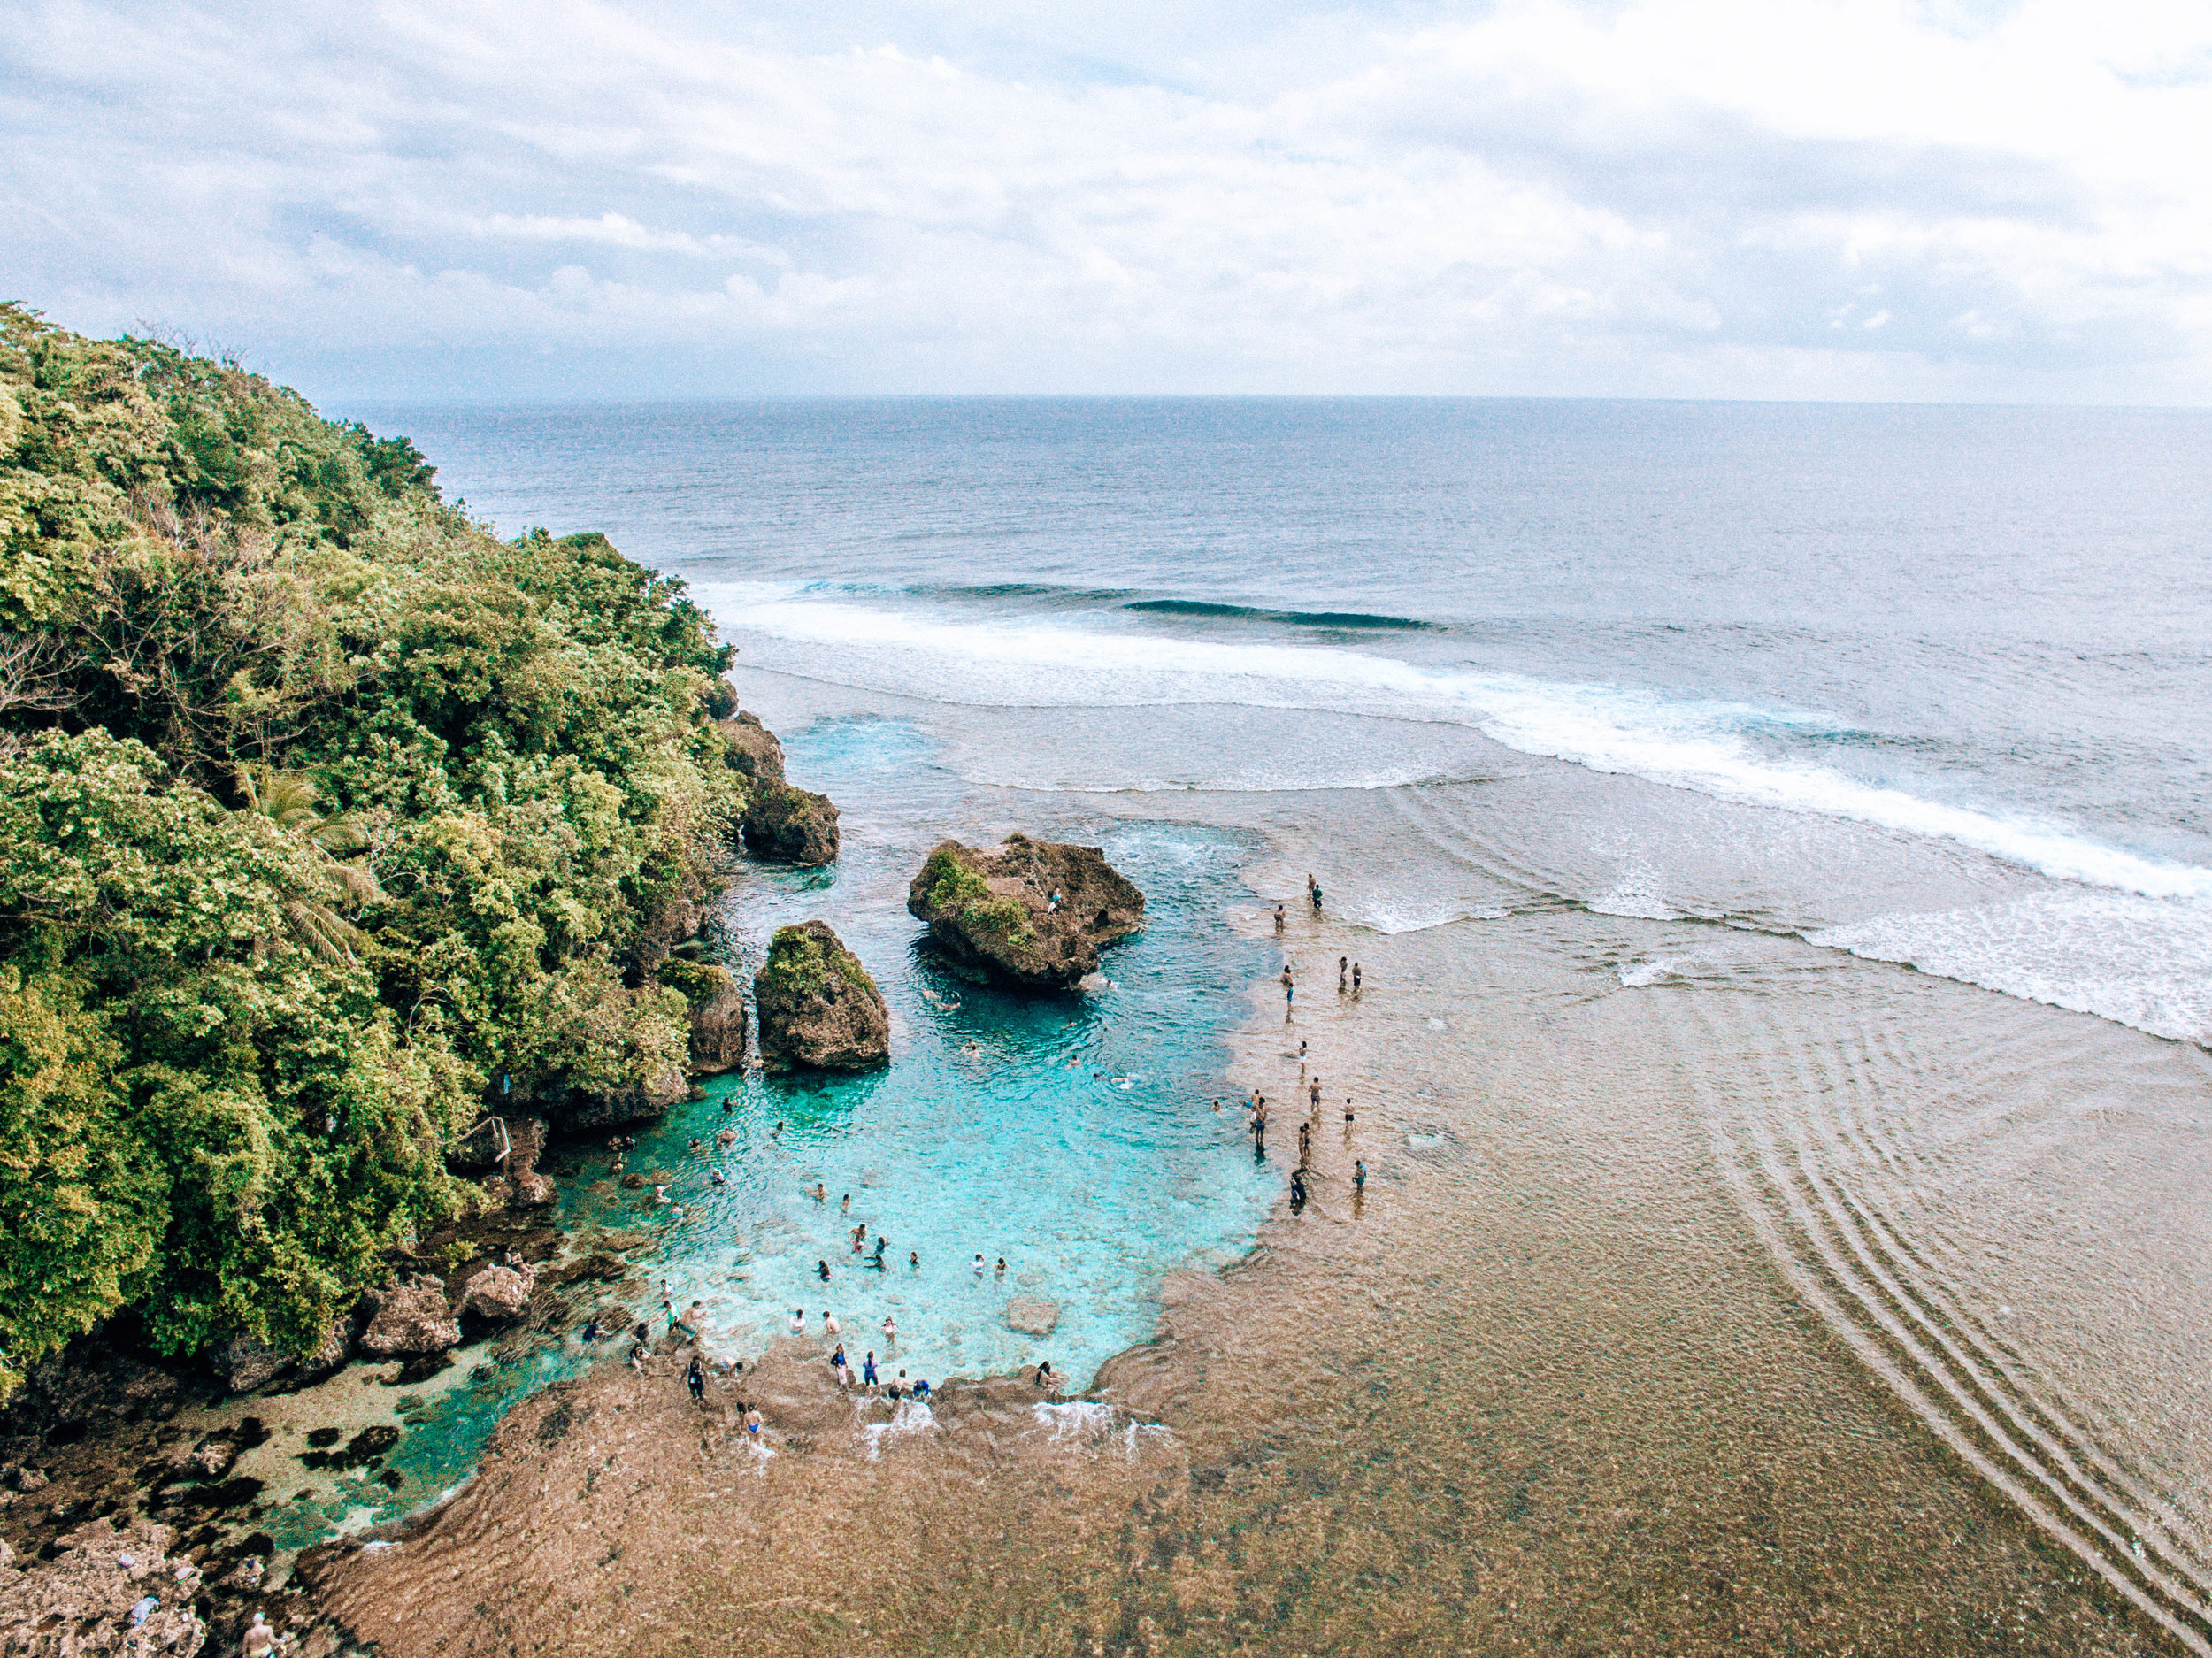 The pools from the sky - Magpupungko Beach - Siargao - Philippines